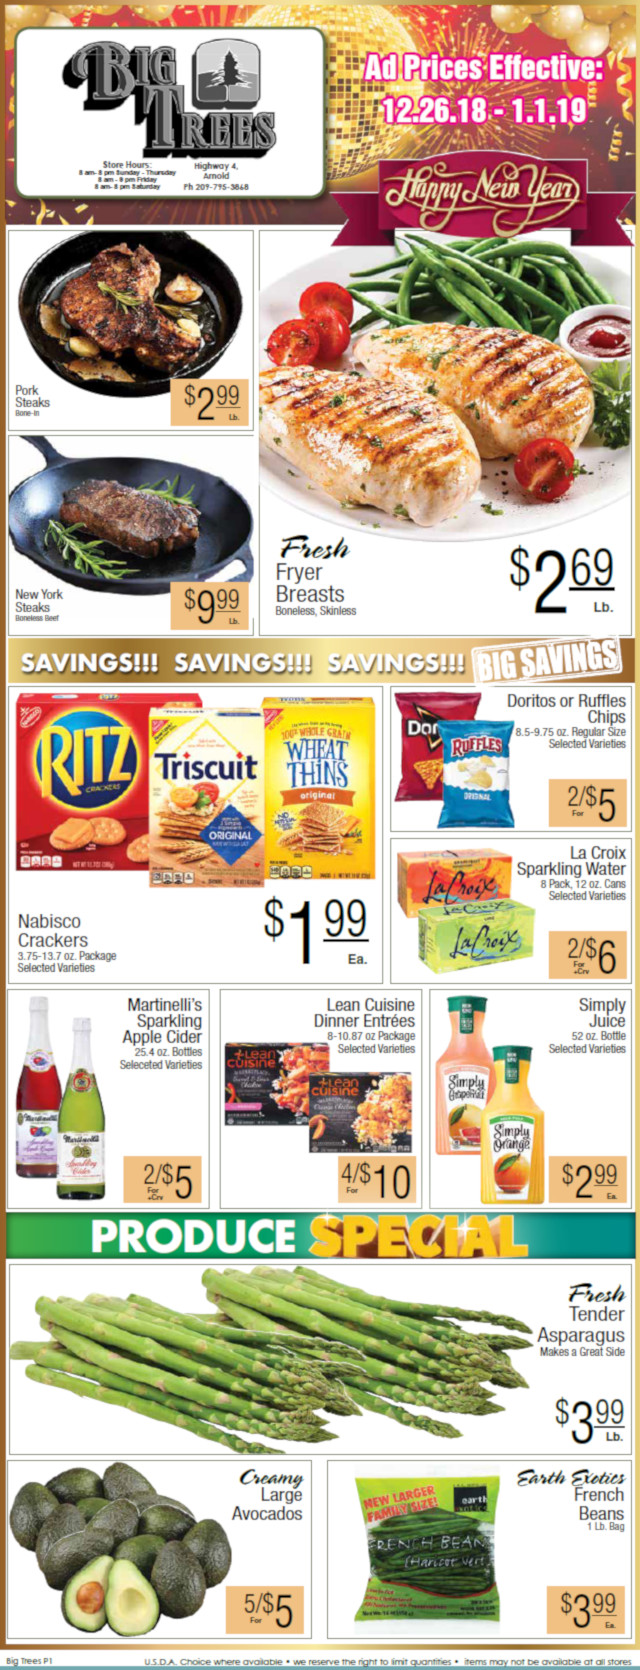 Big Trees Market Weekly Ad & Grocery Specials Through January 1st, 2019